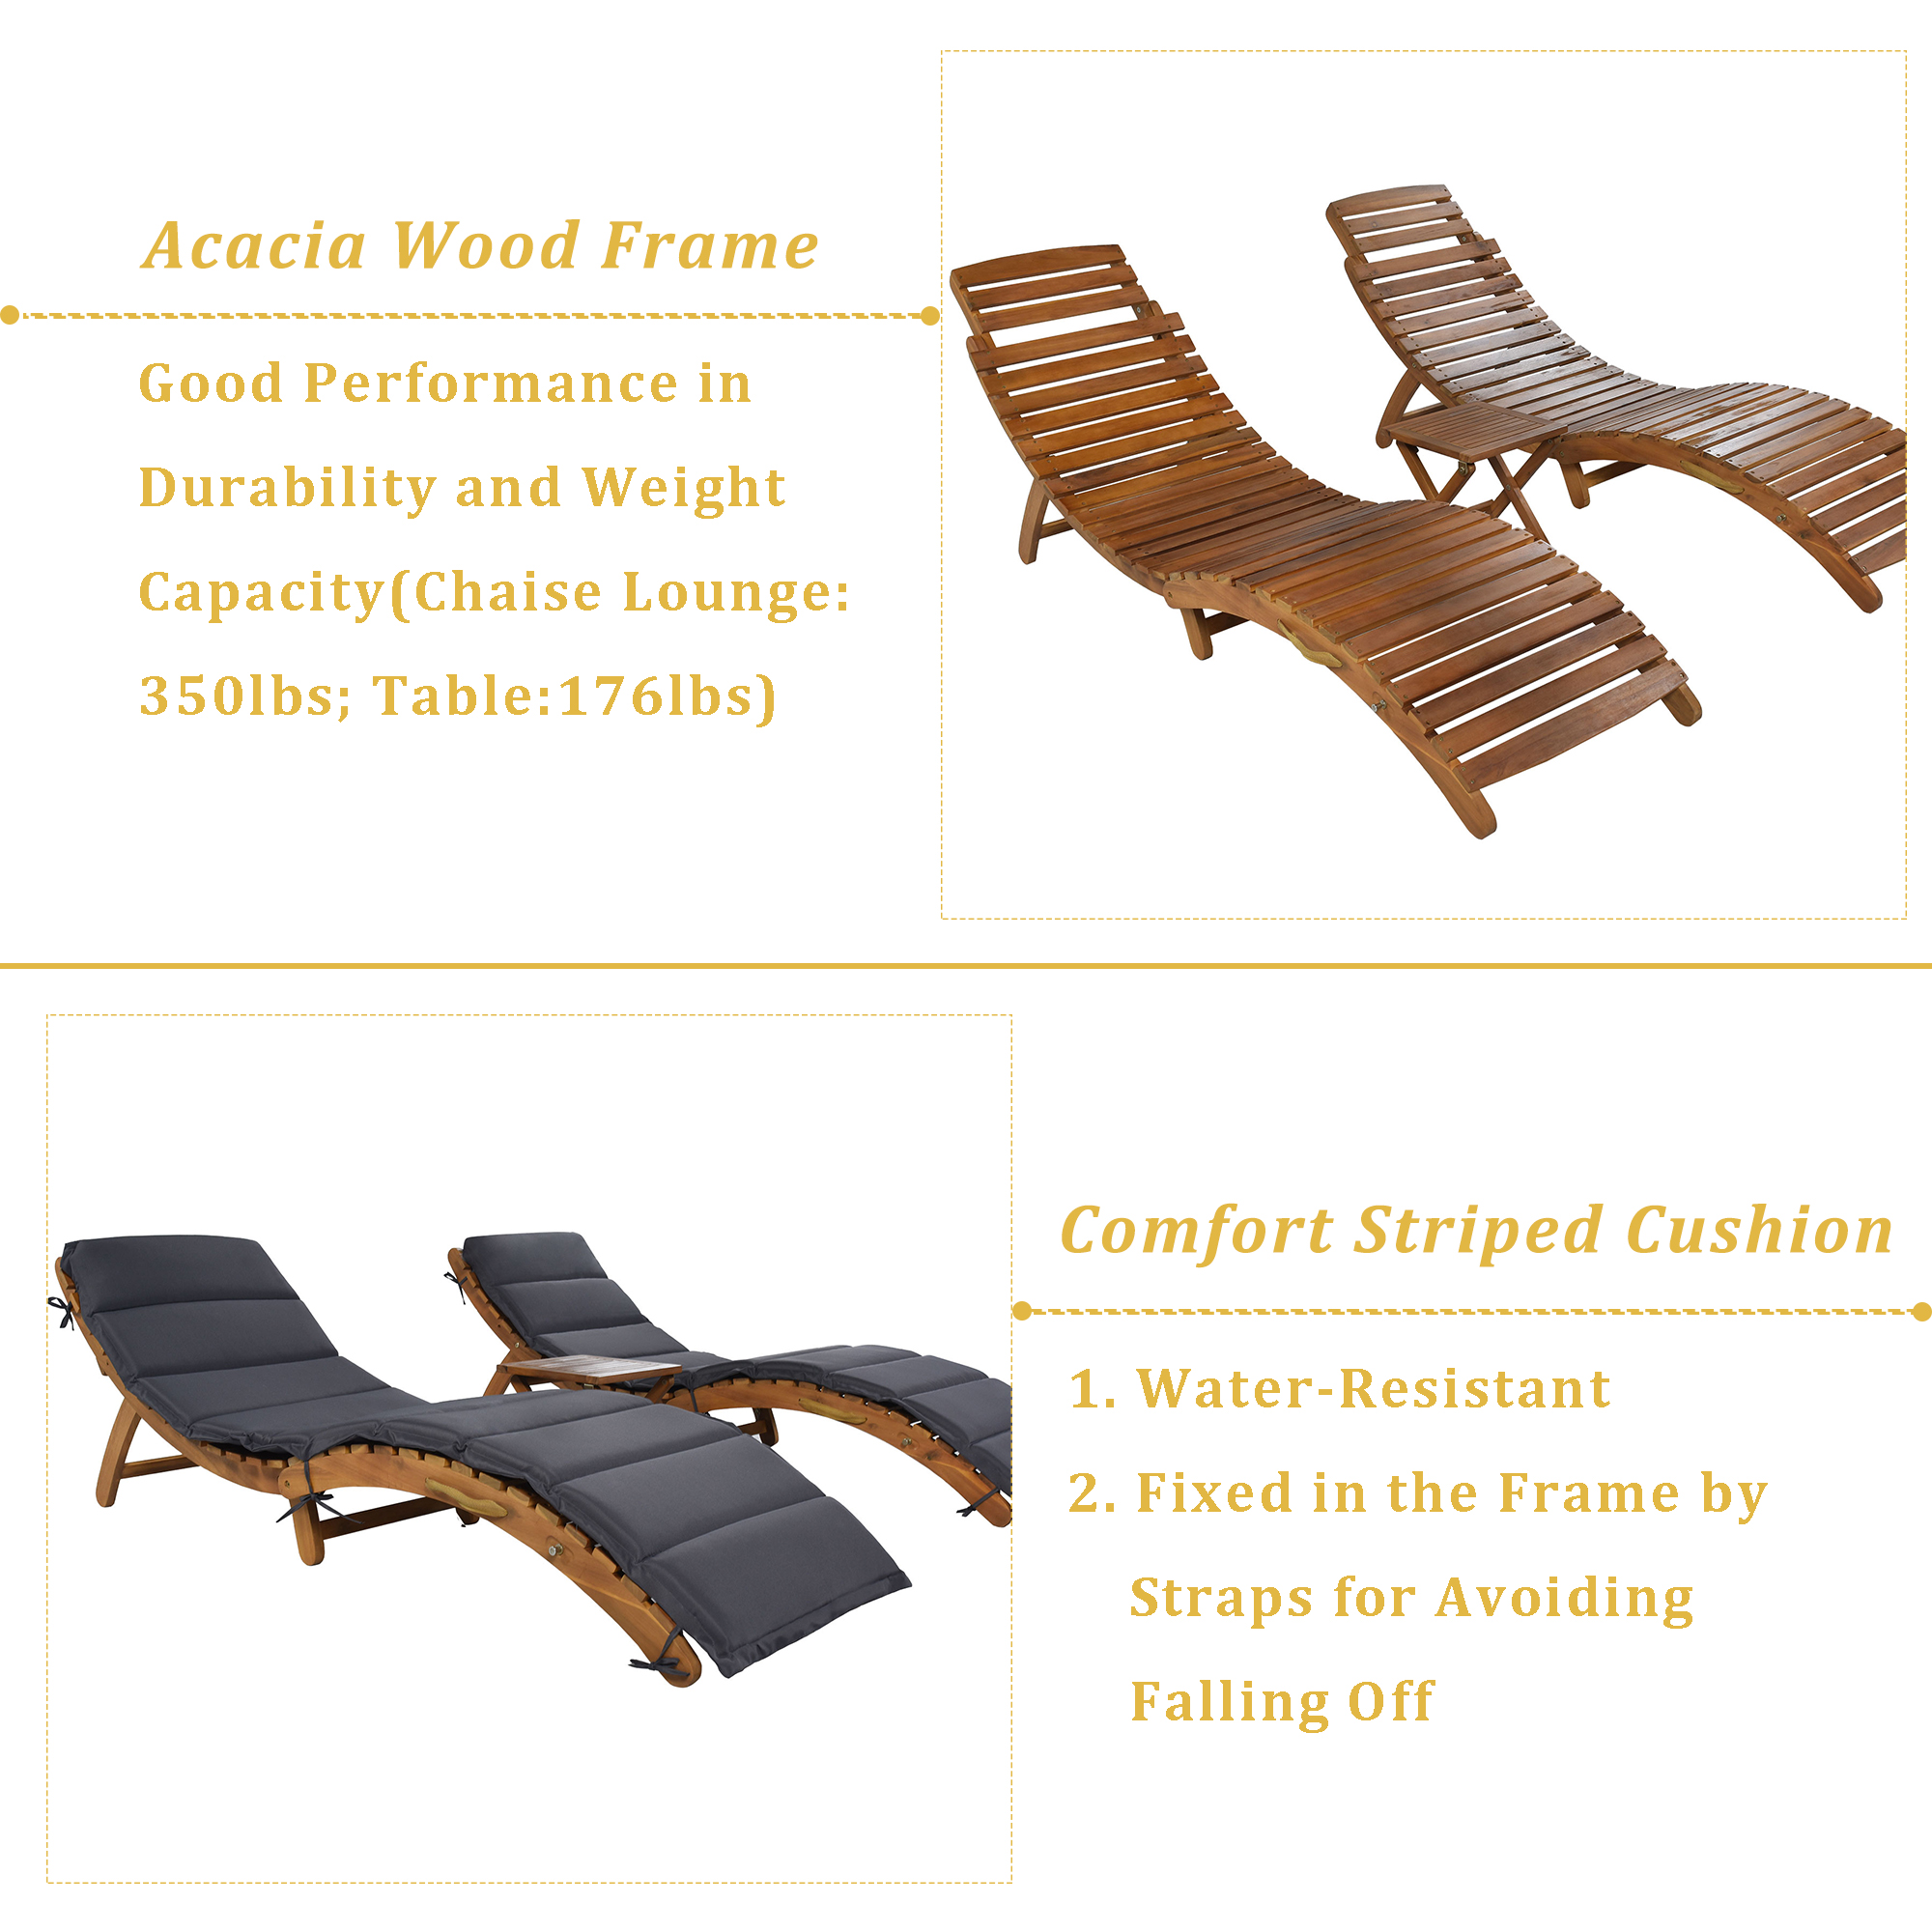 3 Pieces Outdoor Chaise Lounge Set, Wood Patio Furniture Set Extended, 2 Foldable Chaise Lounge Chair with 1 Table, Sun Lounger for Poolside Beach Patio, Brown Lounger + Gray Cushion - image 4 of 9